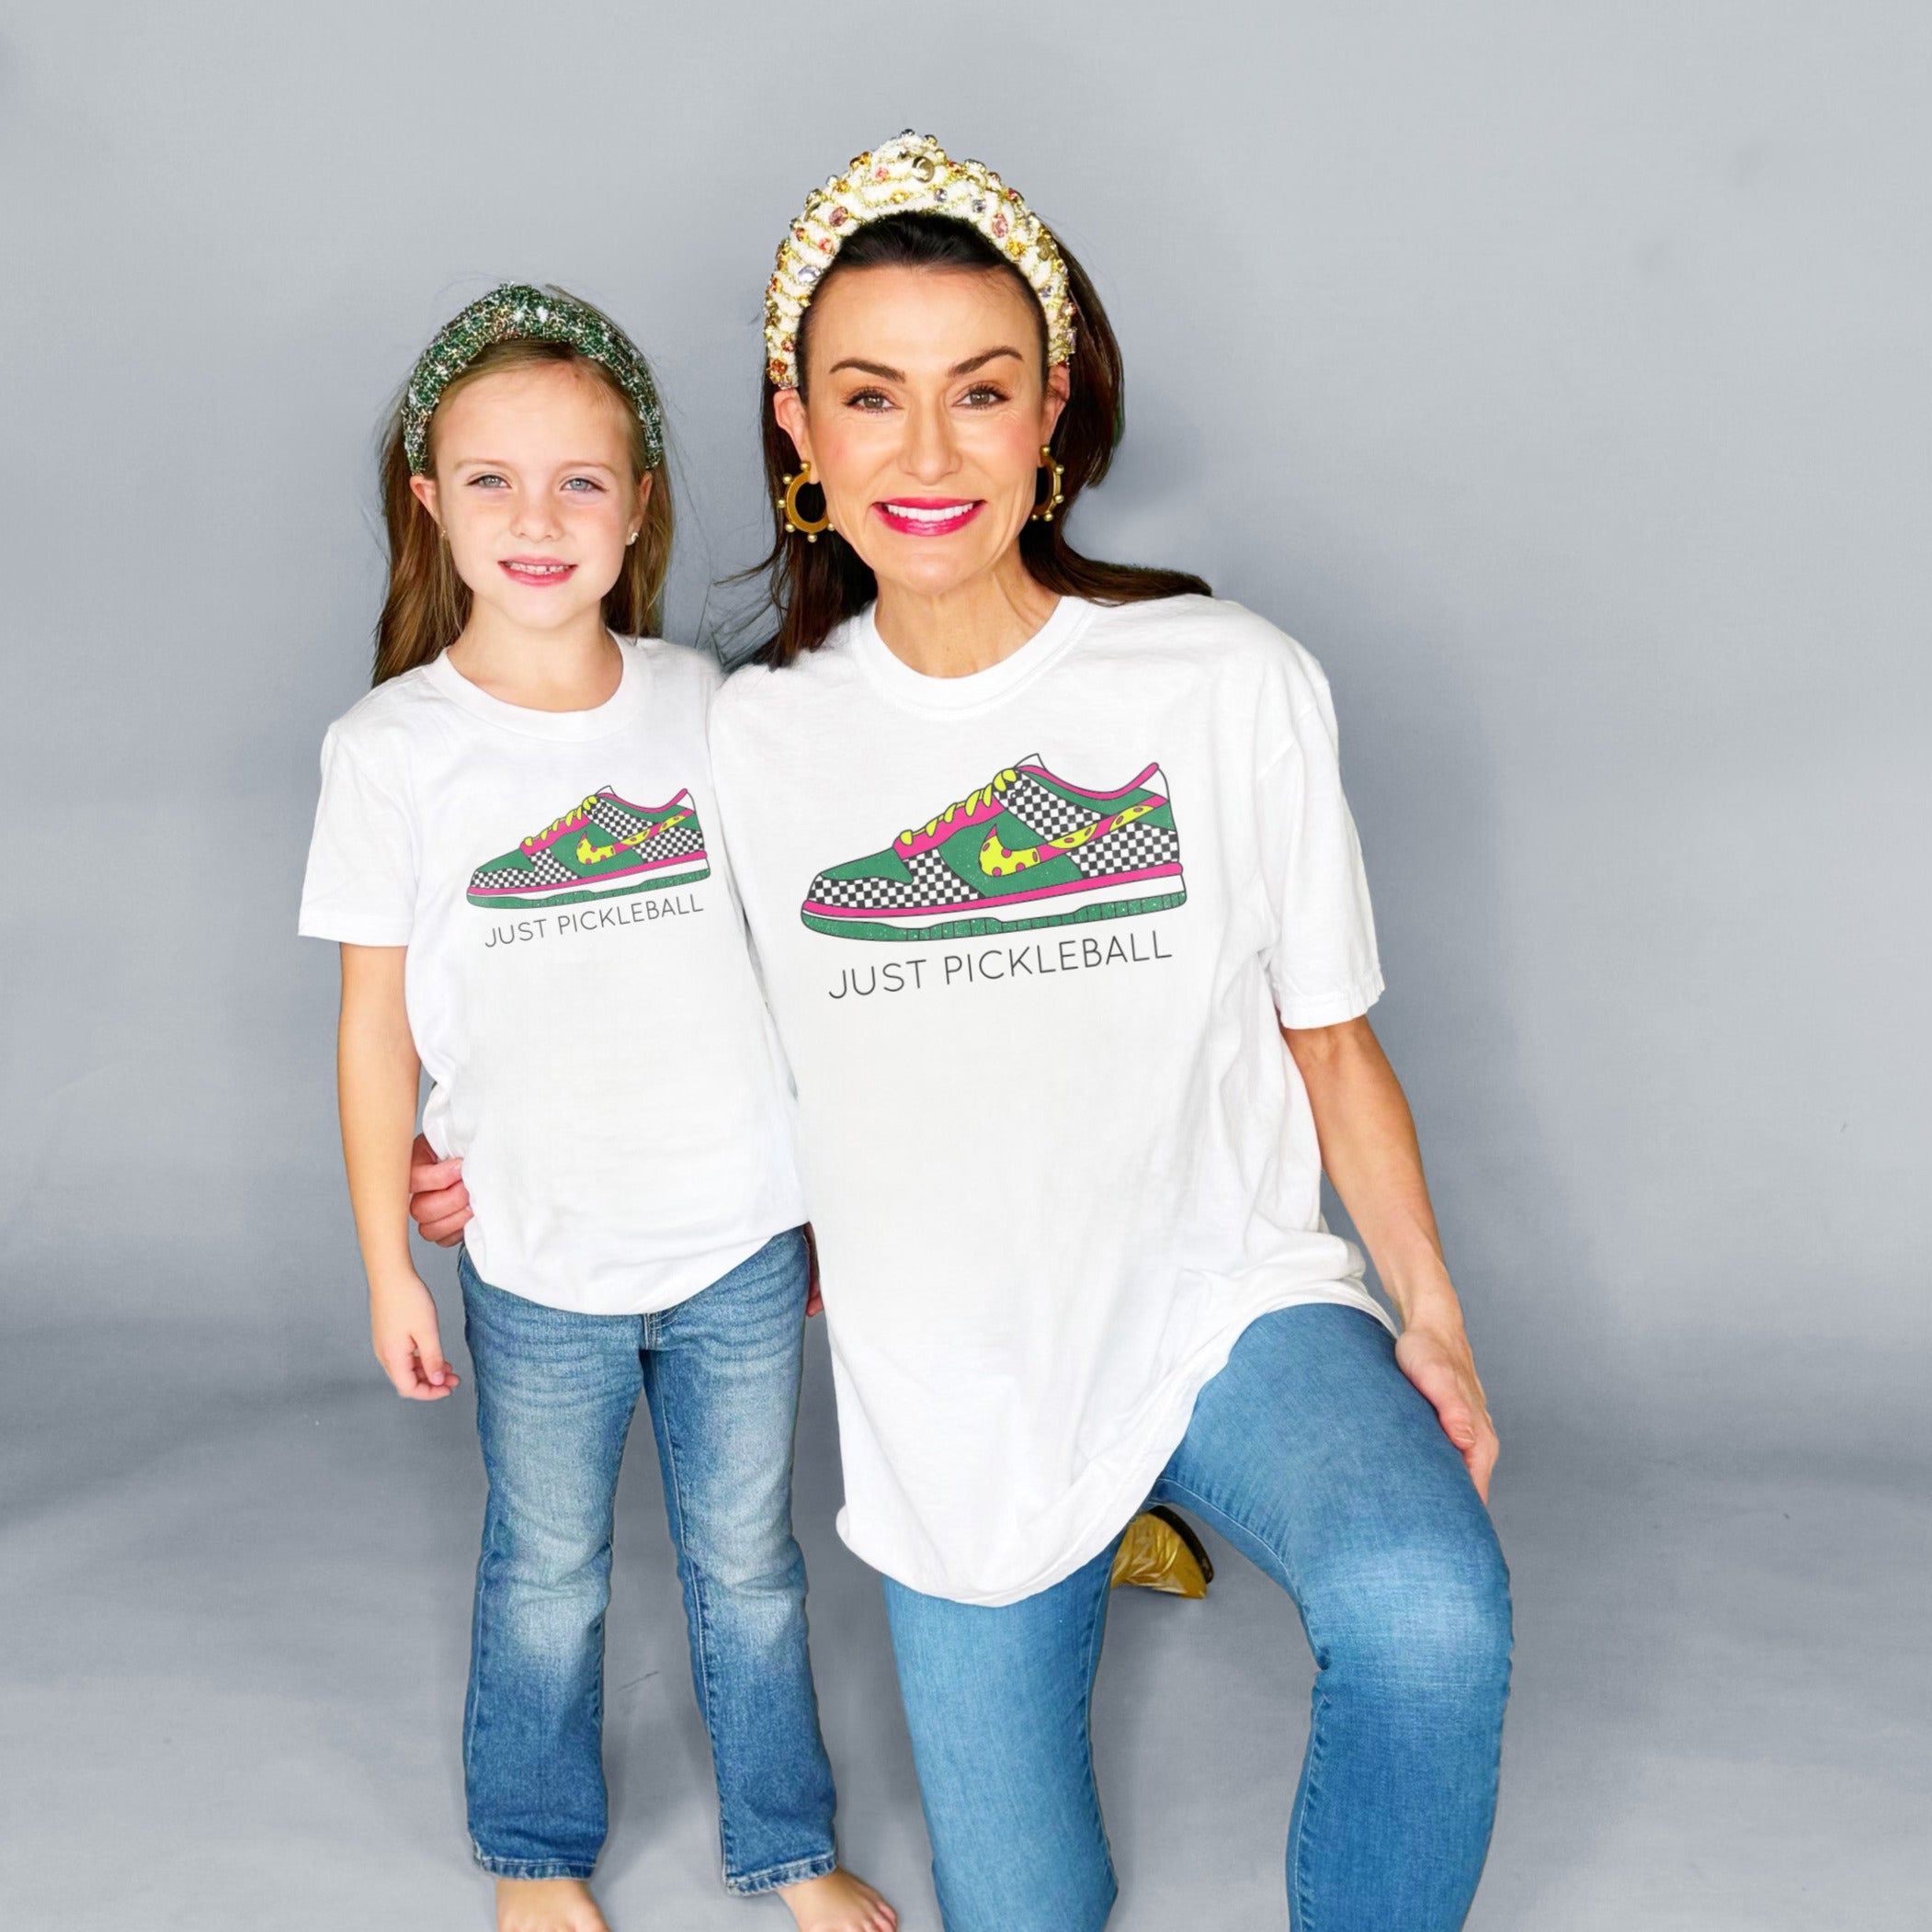 Just Pickleball Youth and Adult Tee